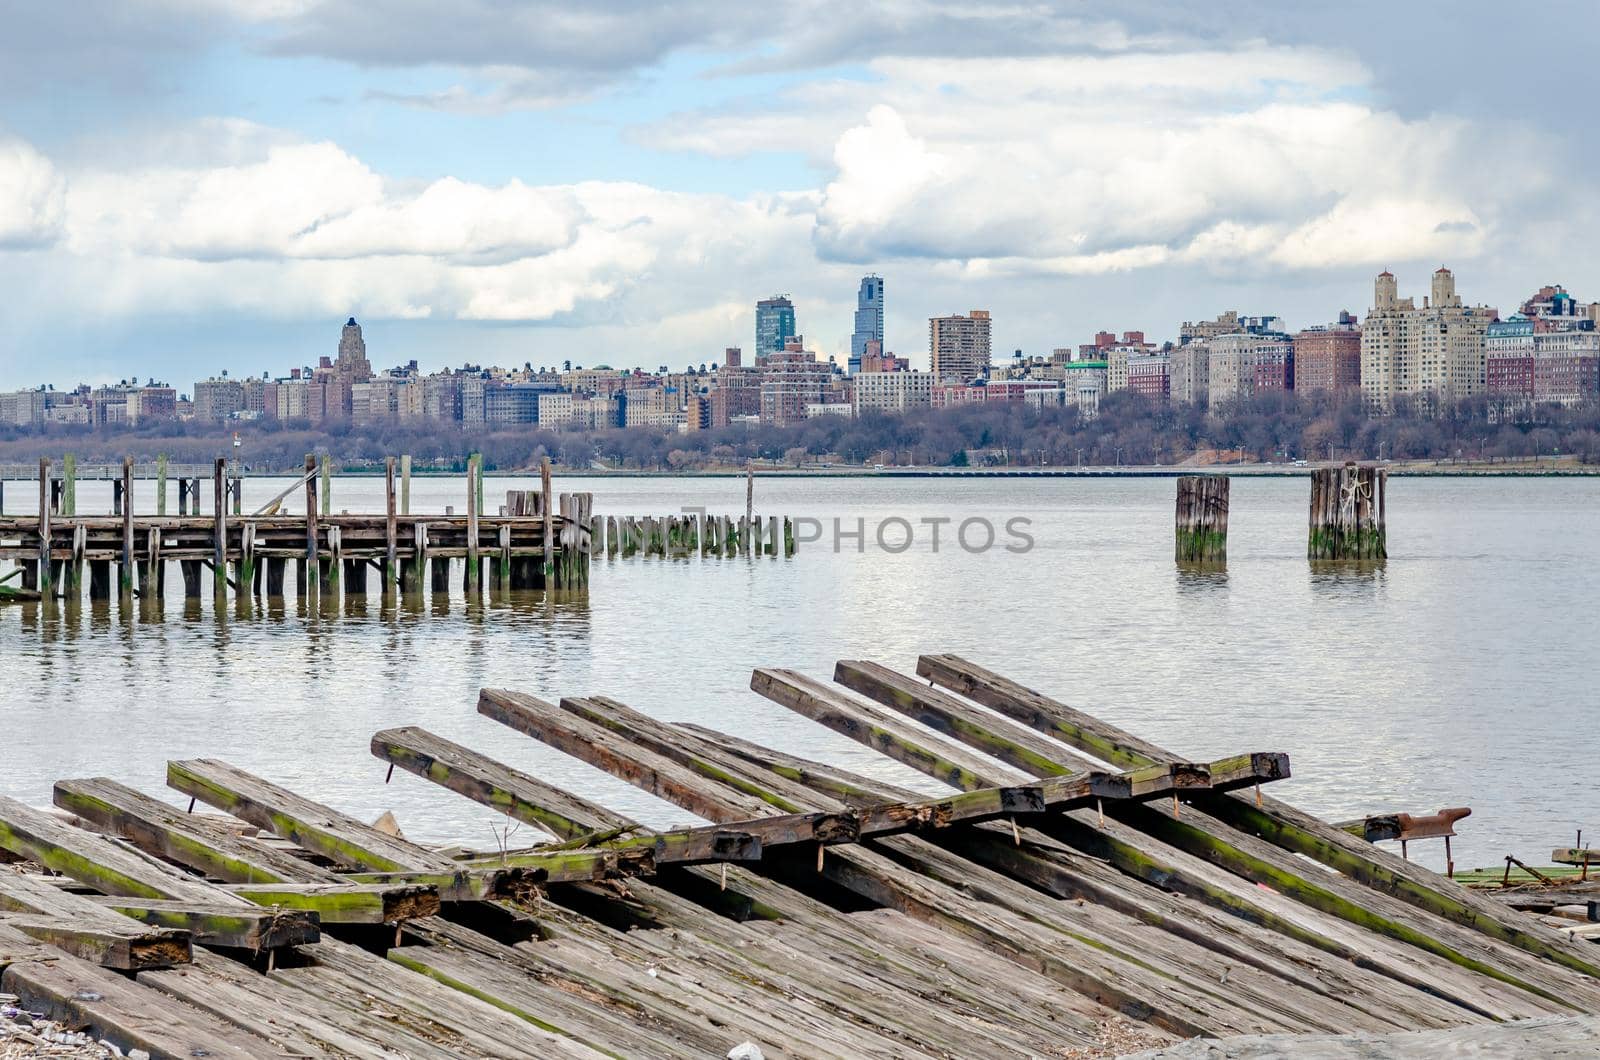 View of Manhattan, New York City with wooden landing stage and Hudson river in front by bildgigant